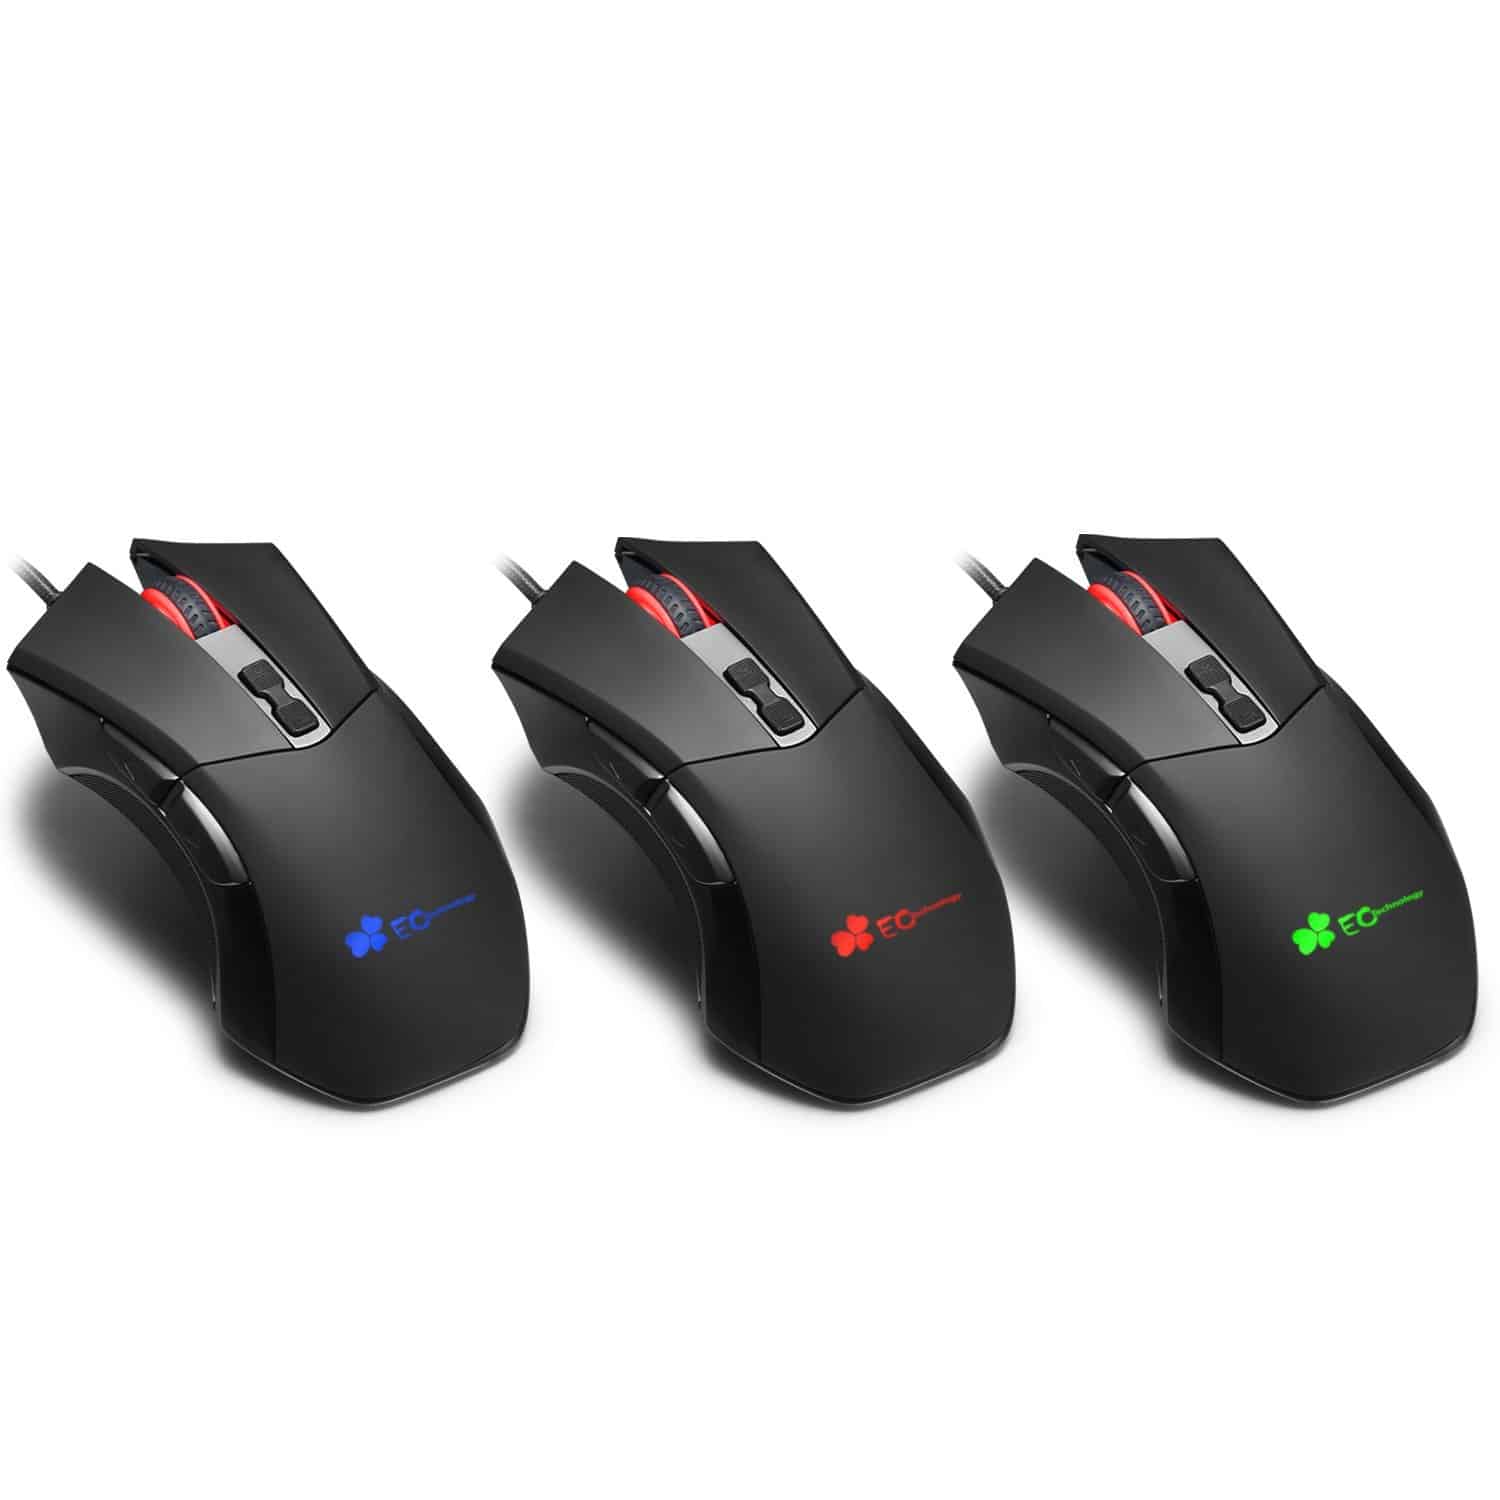 EC tech mouse with lights